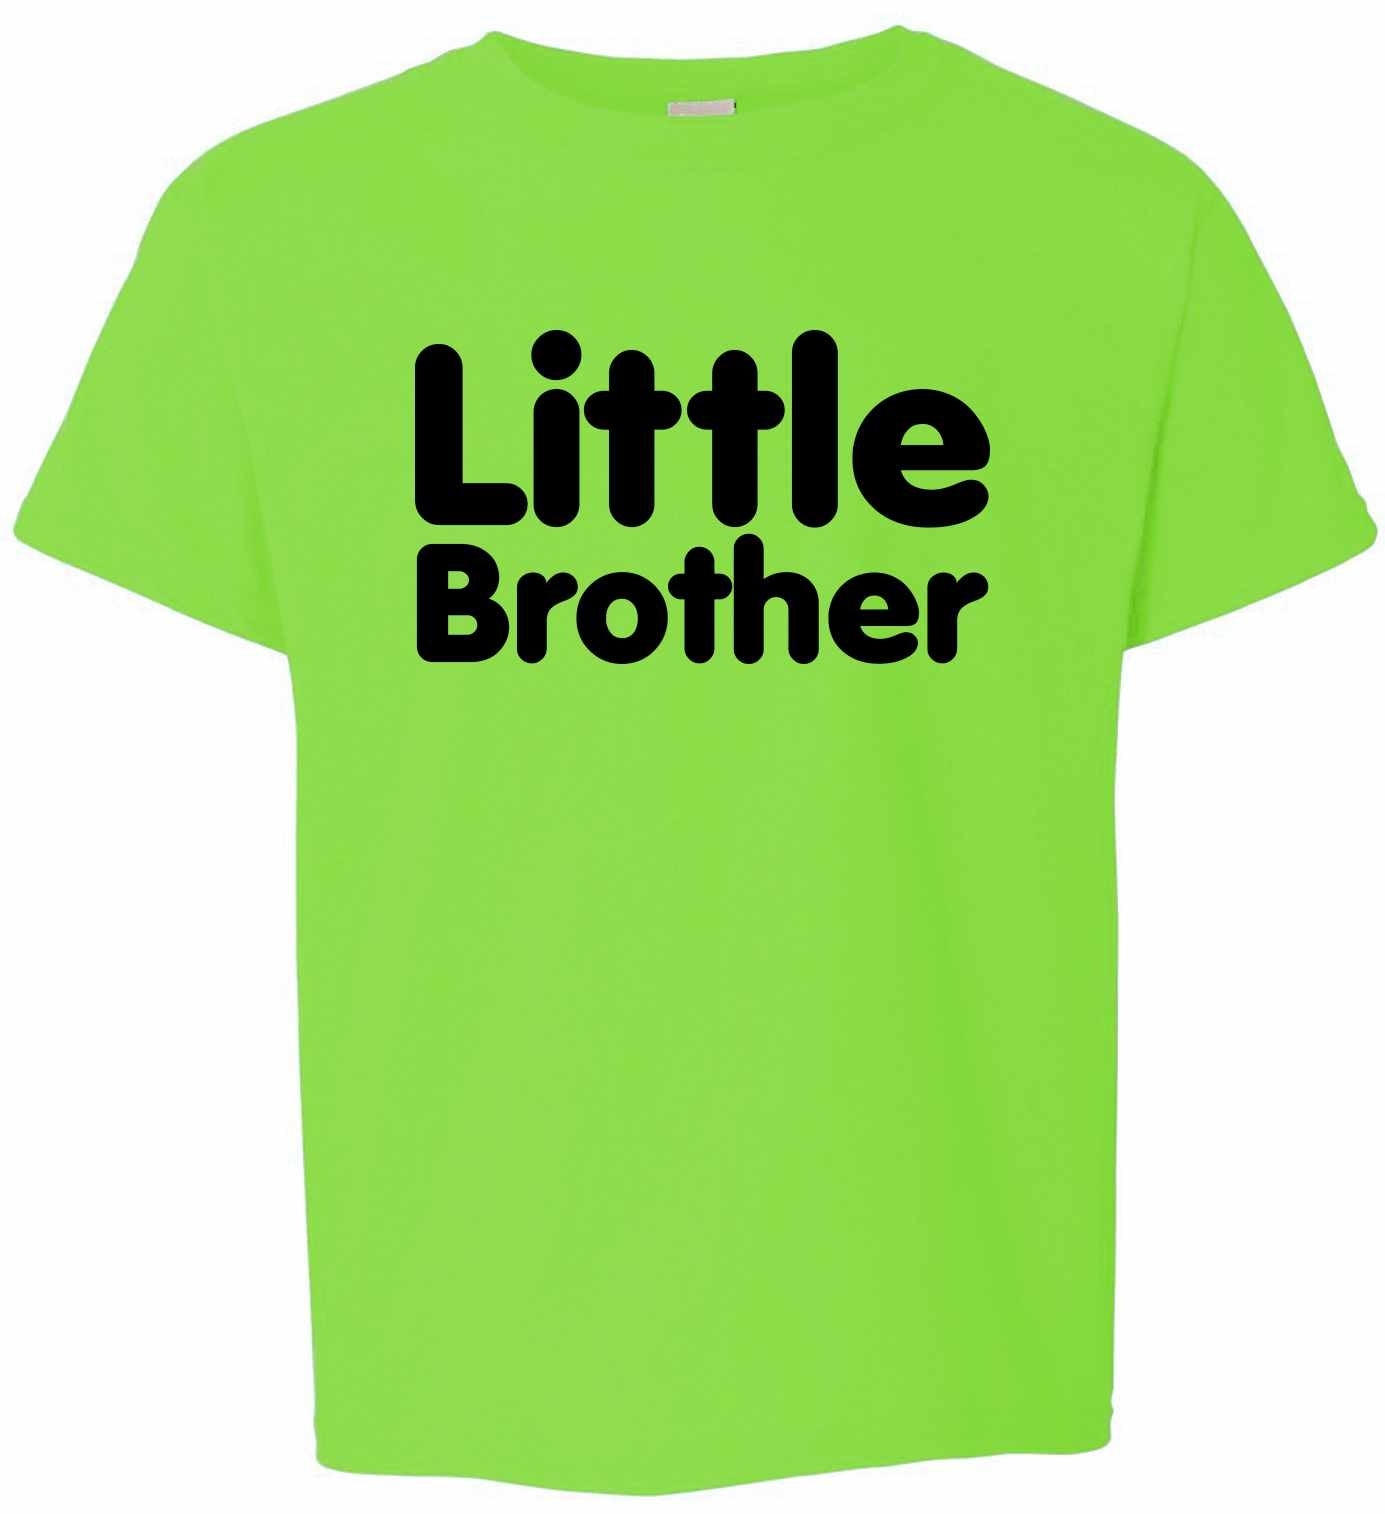 Little Brother on Kids T-Shirt (#1028-201)